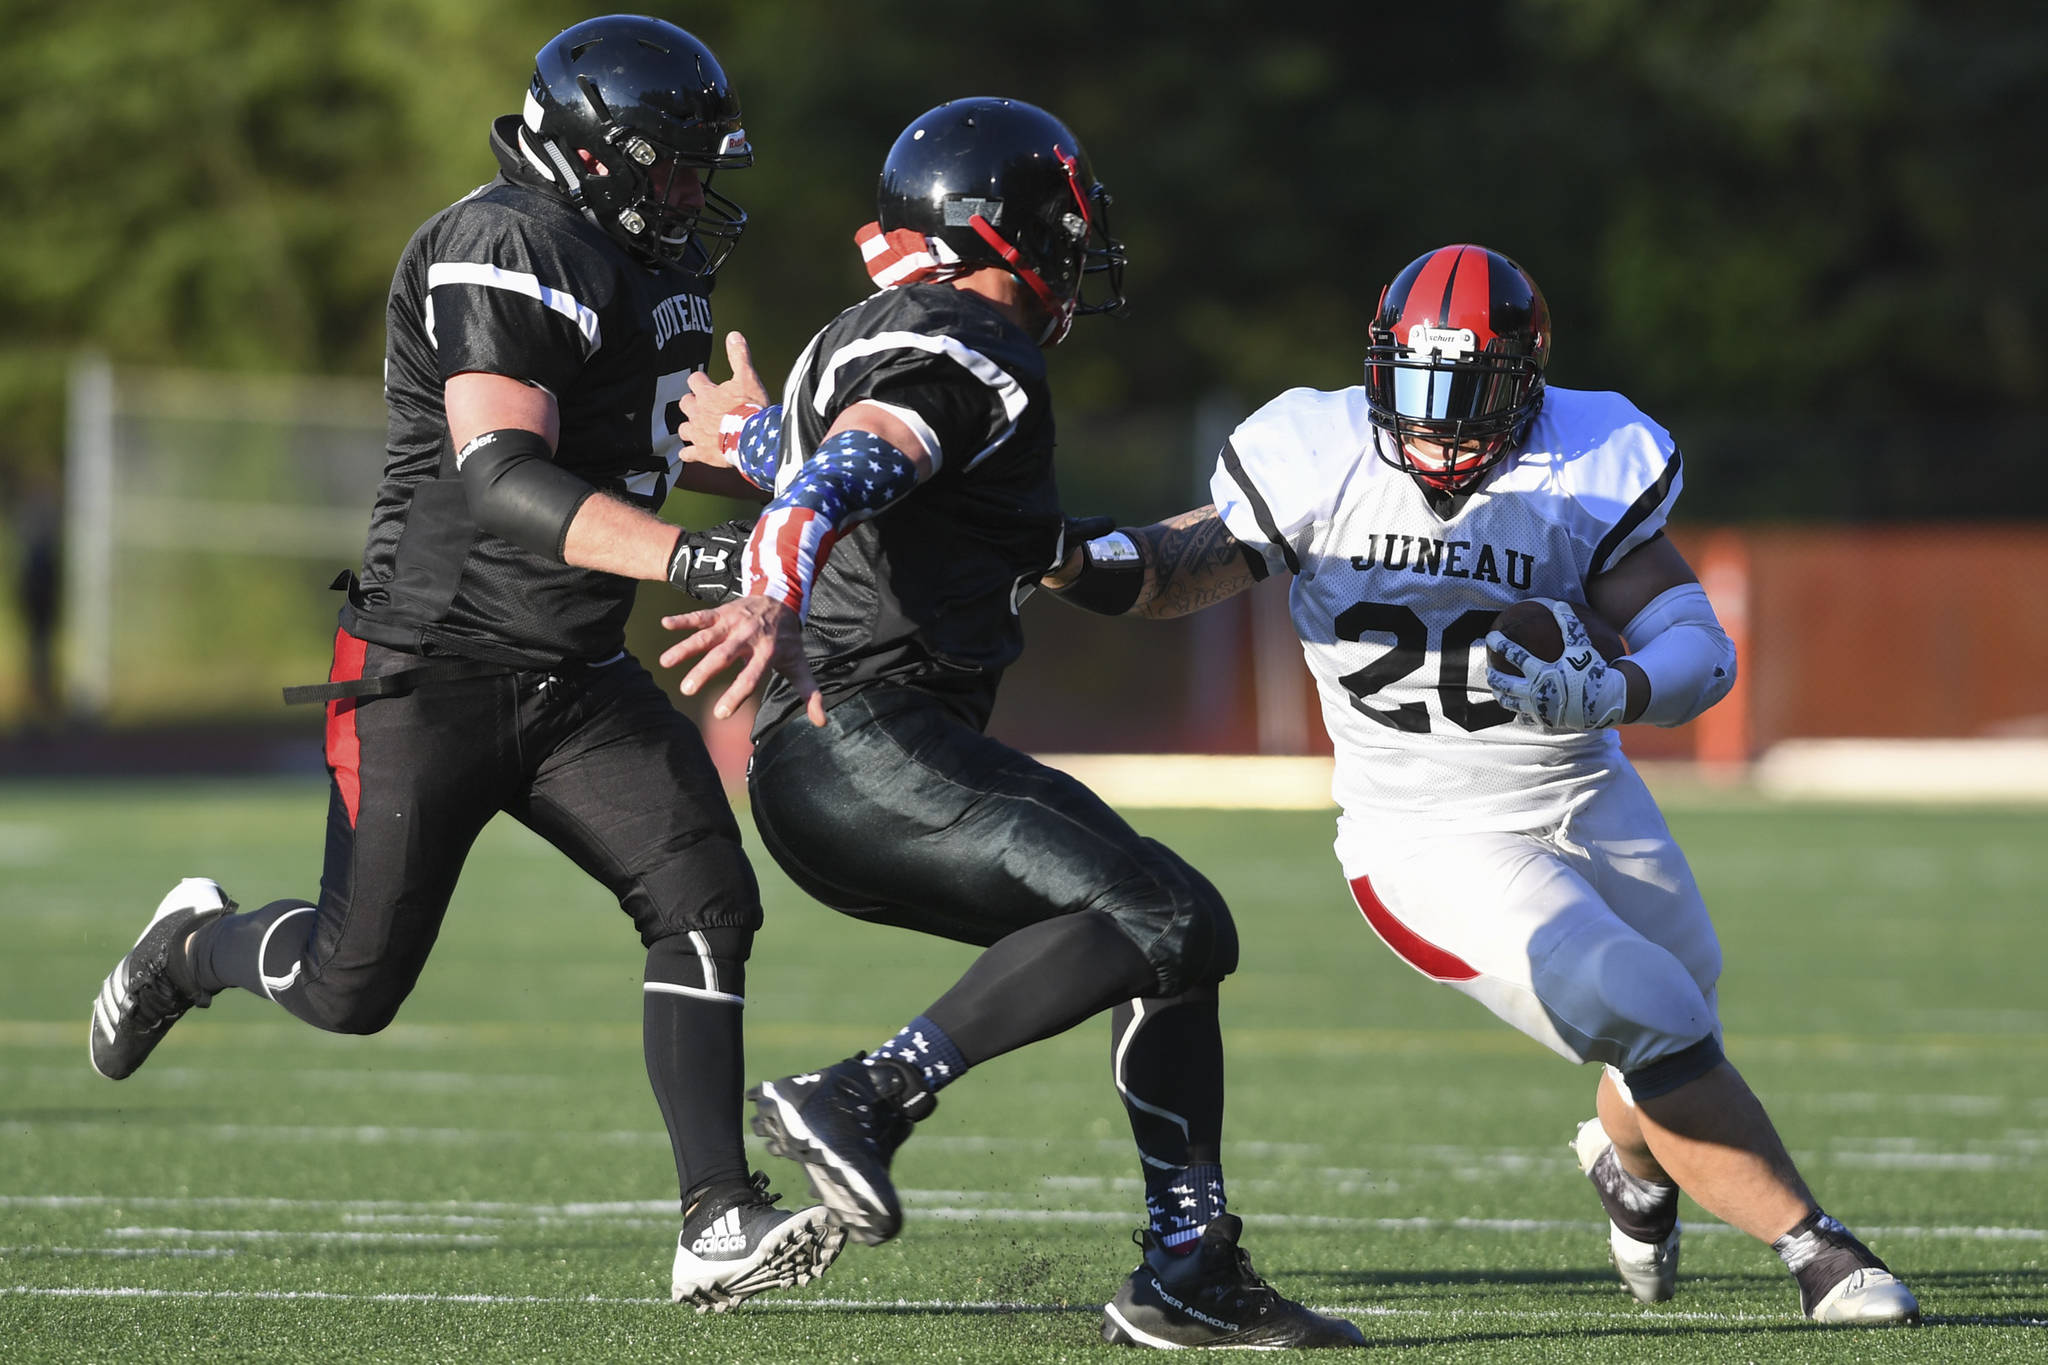 Stars’ Lance Fenumiai, right, is pursued by Legends’ Tommy Penrose, center, and Jake Ritter in the Juneau Alumni Football Game with football players, dance team members and cheerleaders from Juneau-Douglas and Thunder Mountain High Schools at Adair-Kennedy Memorial Field on Friday, May 24, 2019. (Michael Penn | Juneau Empire)